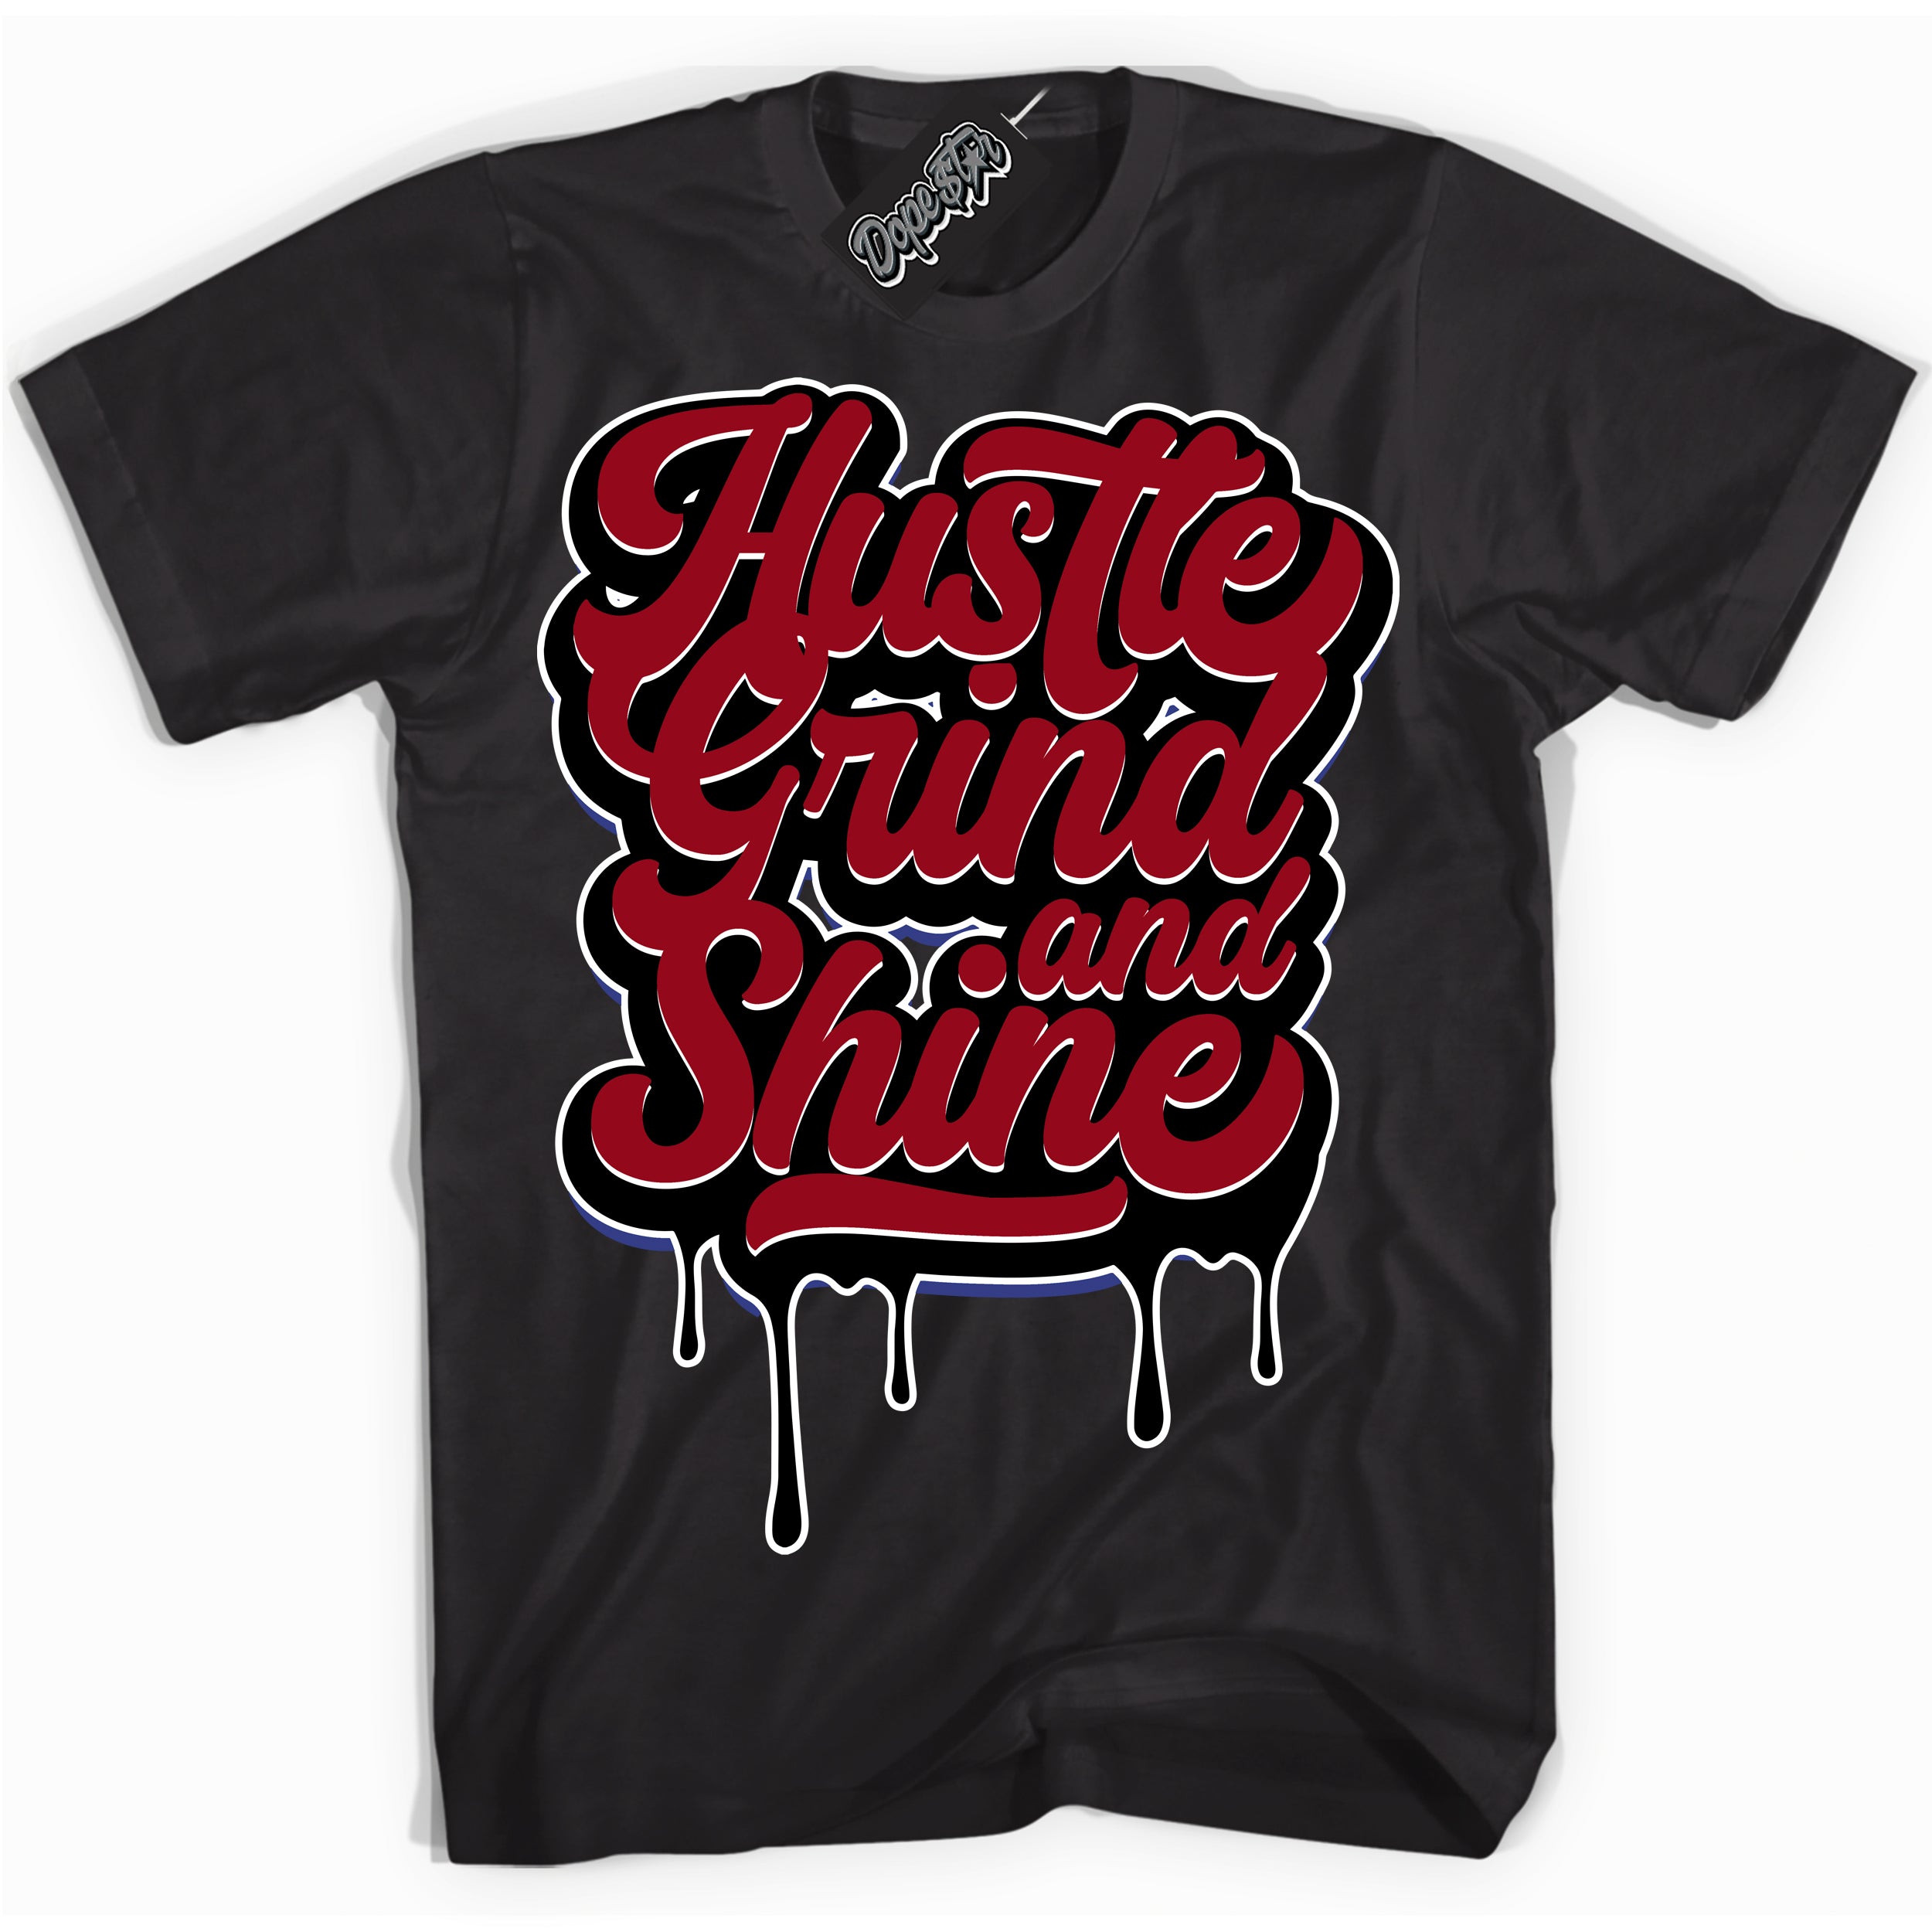 Cool Black Shirt with “ Hustle Grind And Shine ” design that perfectly matches Playoffs 8s Sneakers.